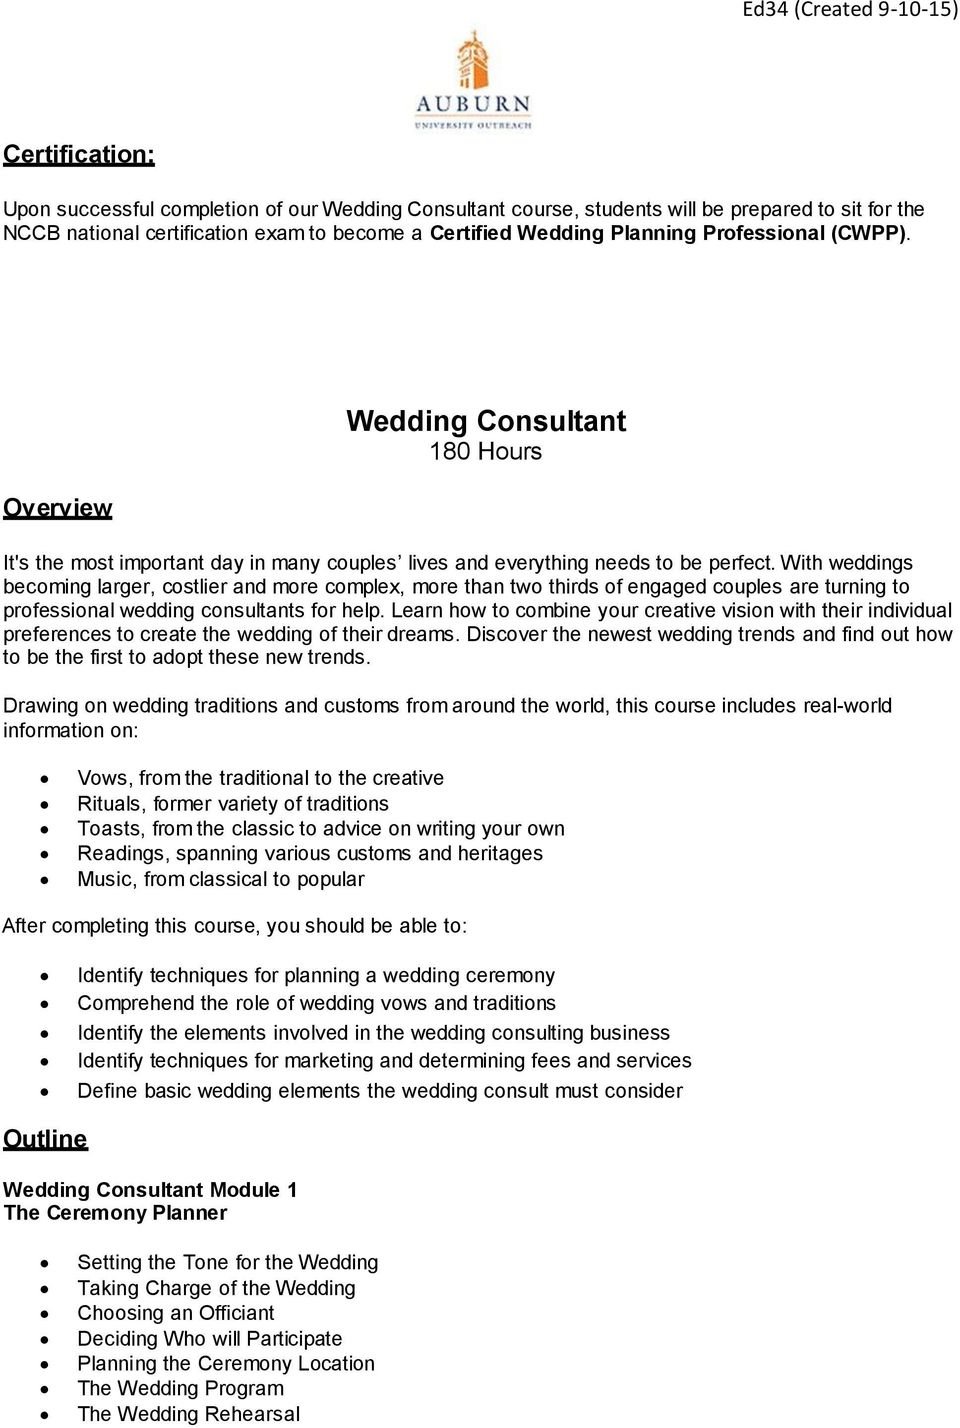 With weddings becoming larger, costlier and more complex, more than two thirds of engaged couples are turning to professional wedding consultants for help.